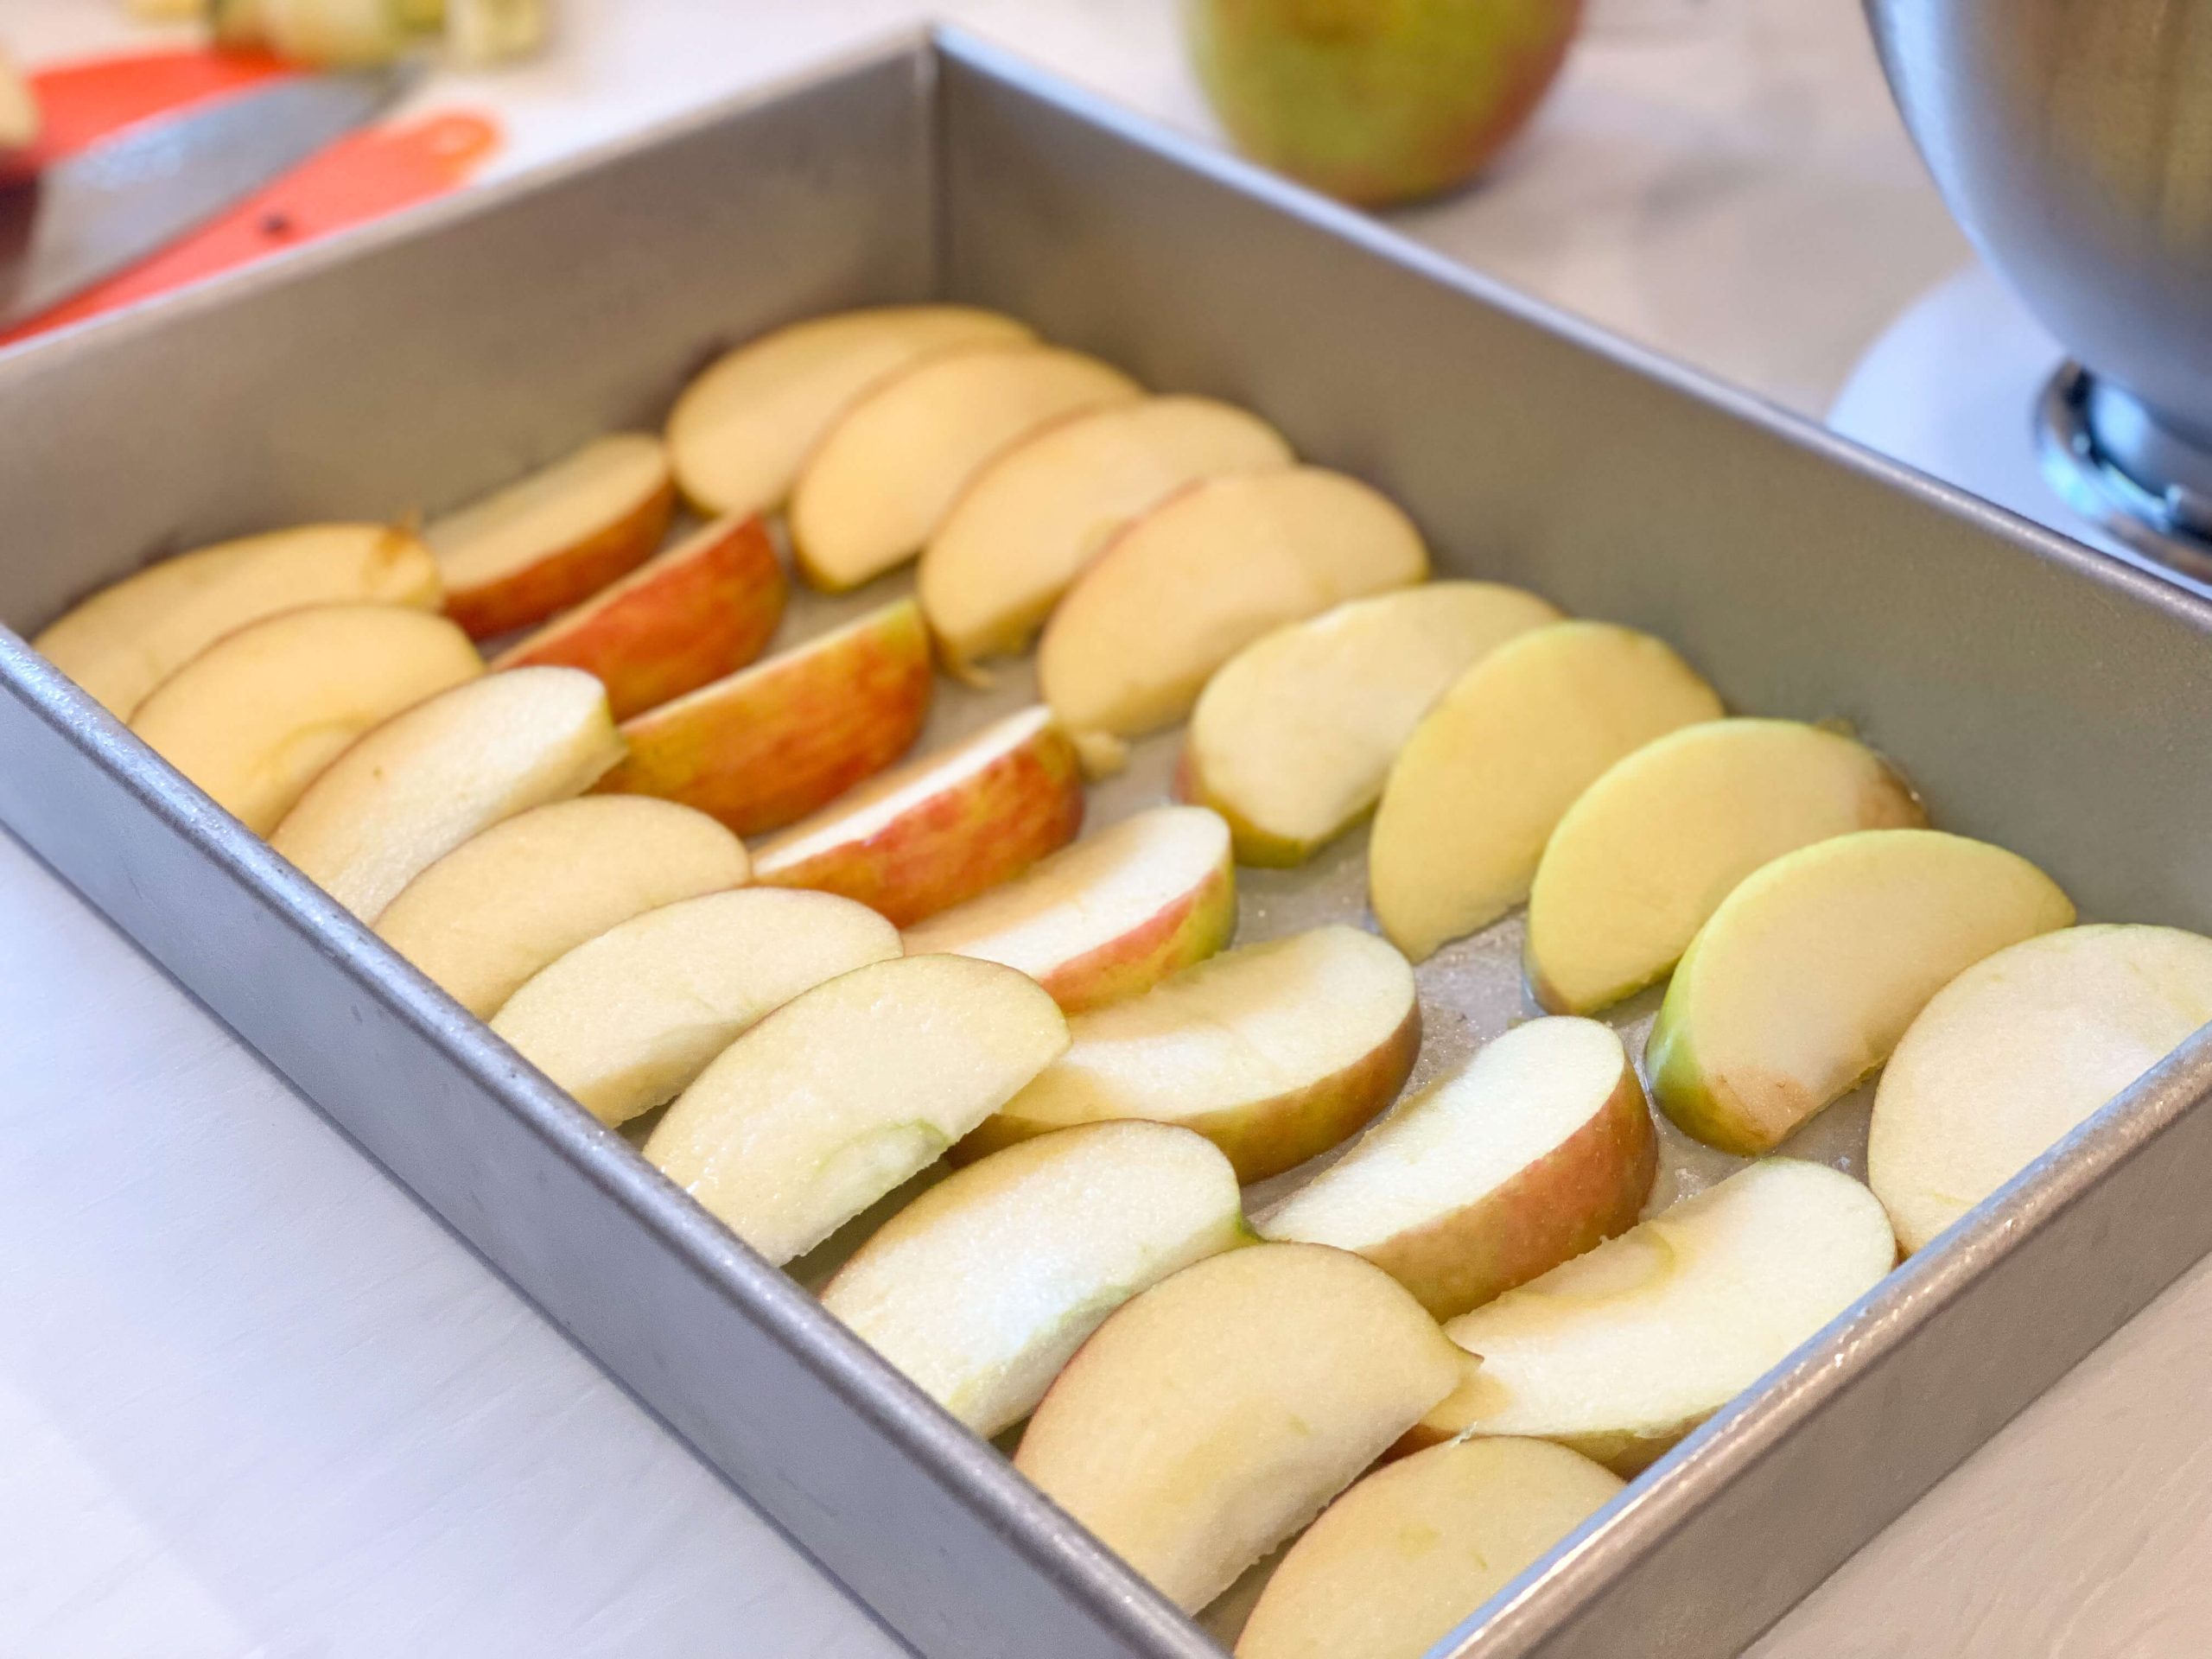 apples arranged in the bottom of the cake pan